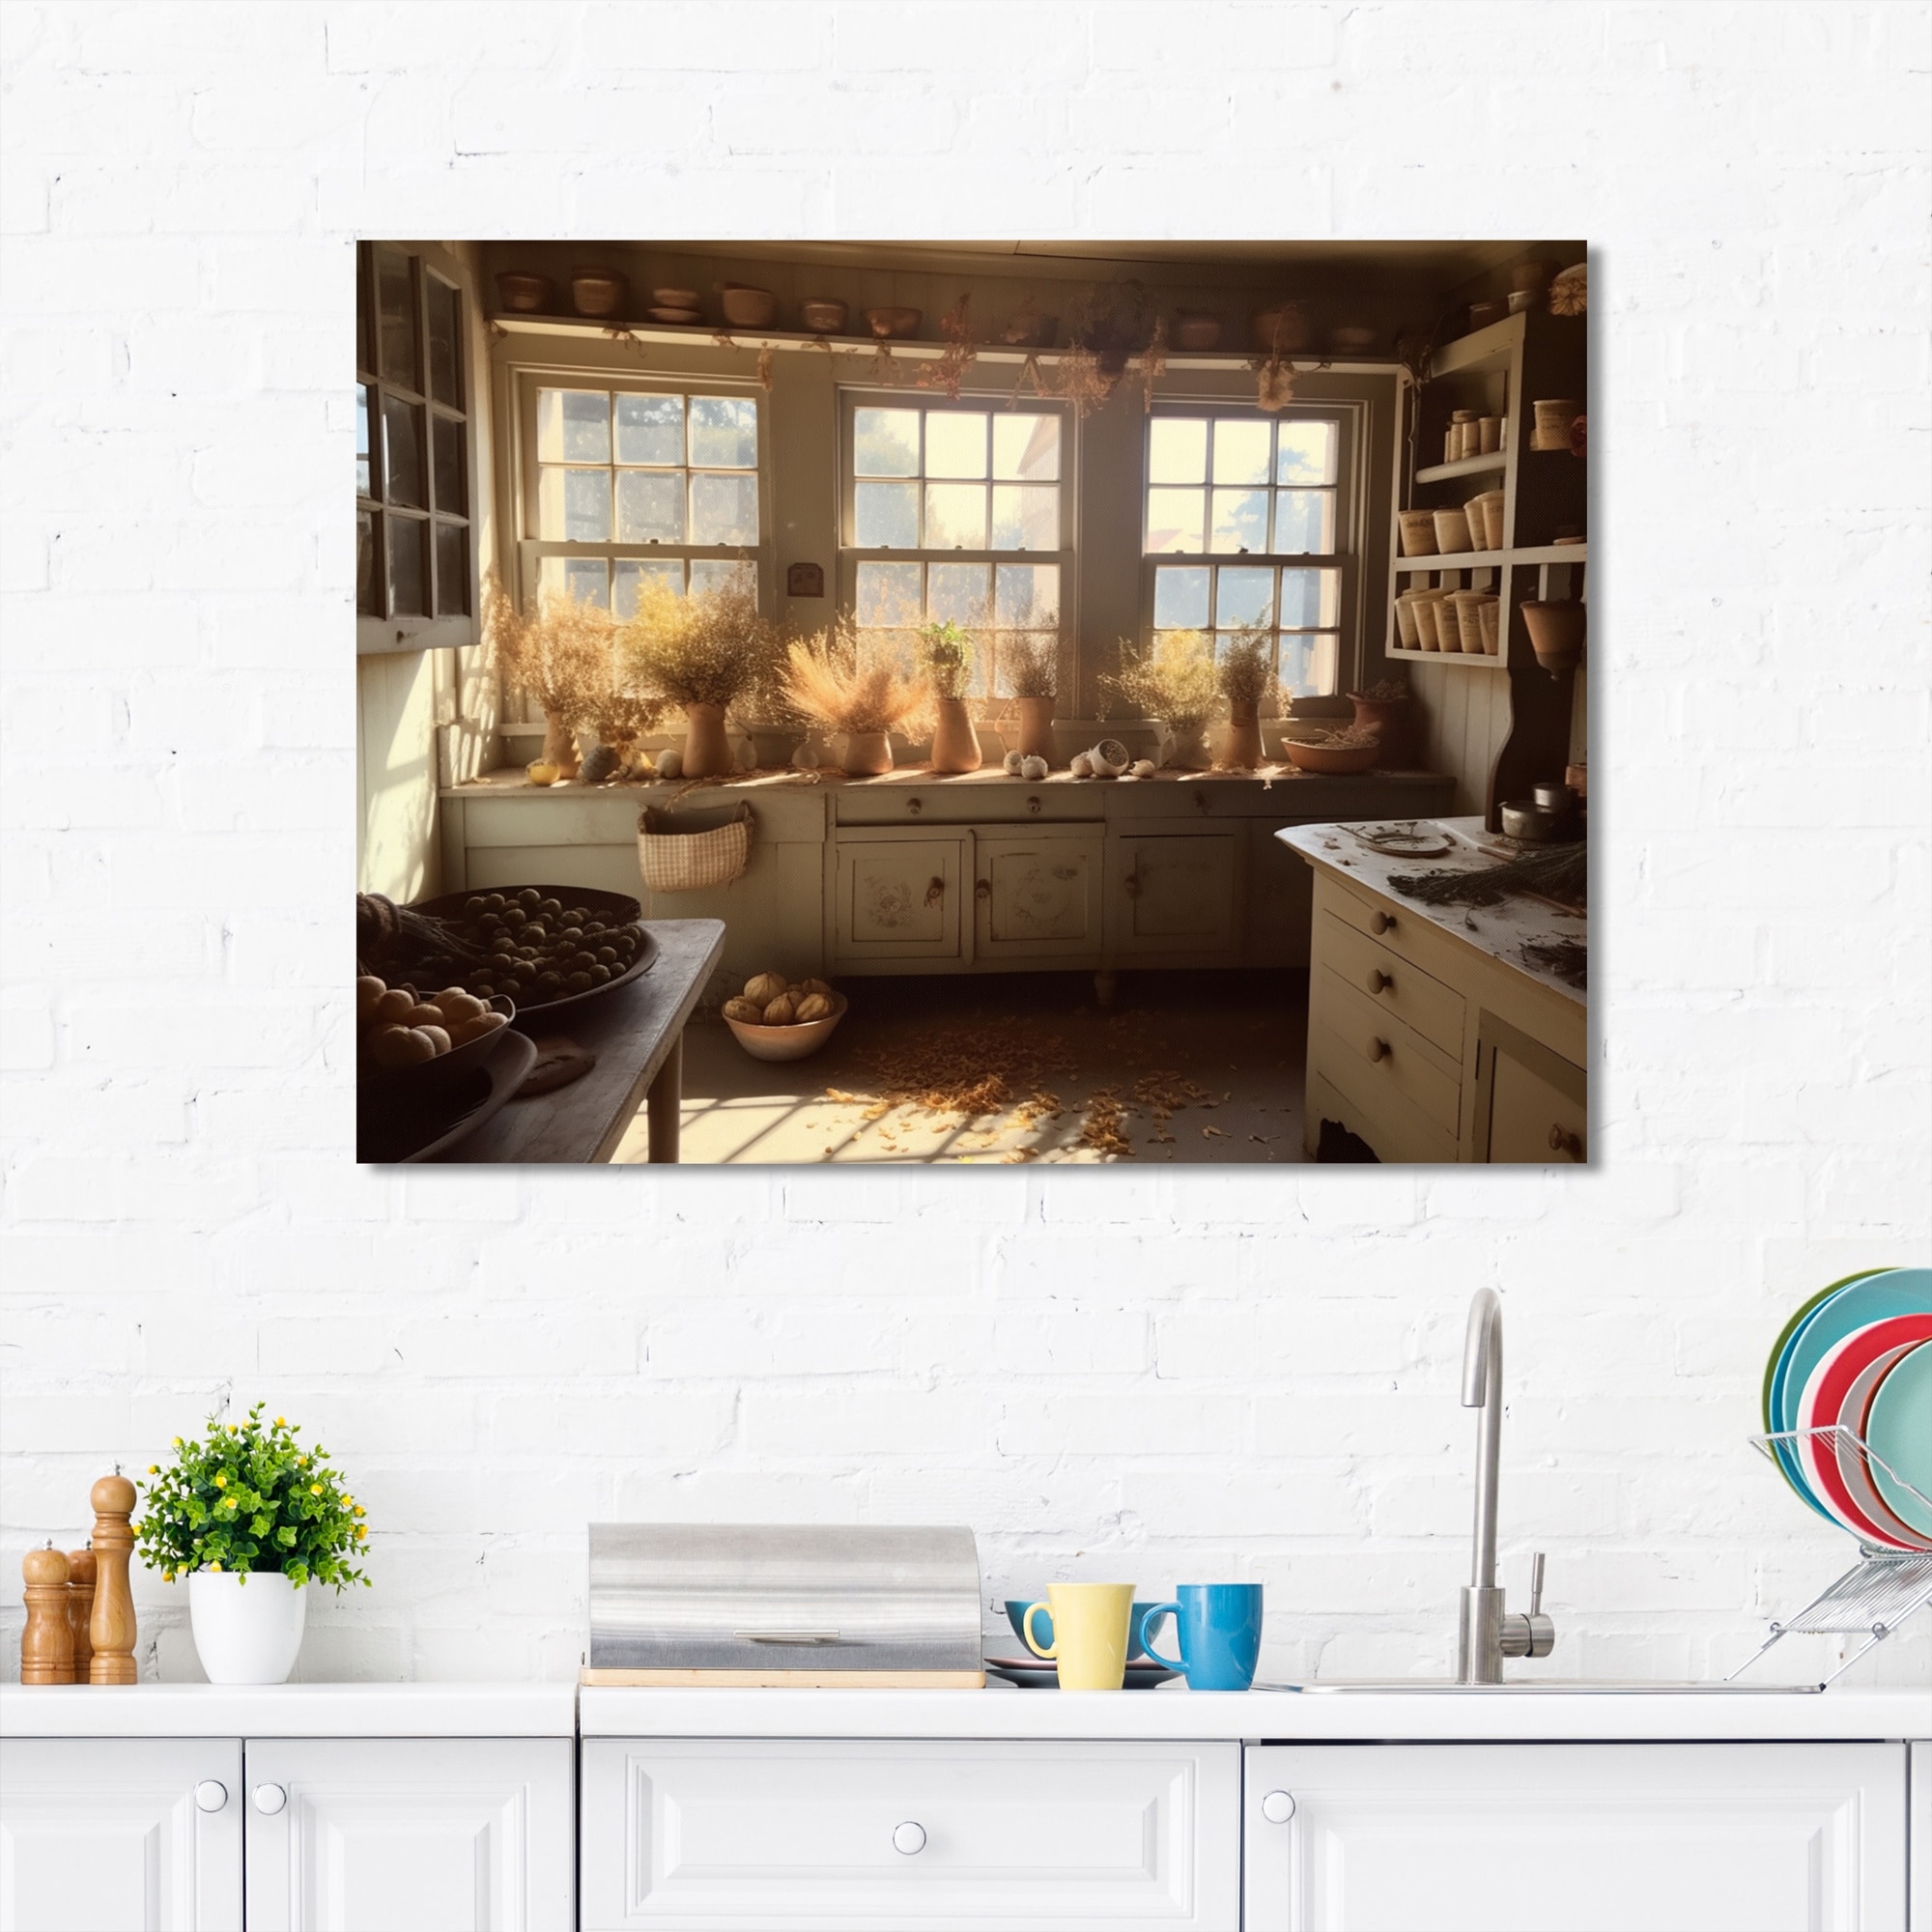  Rustic Kitchen Wall Art Farmhouse Kitchen Pictures